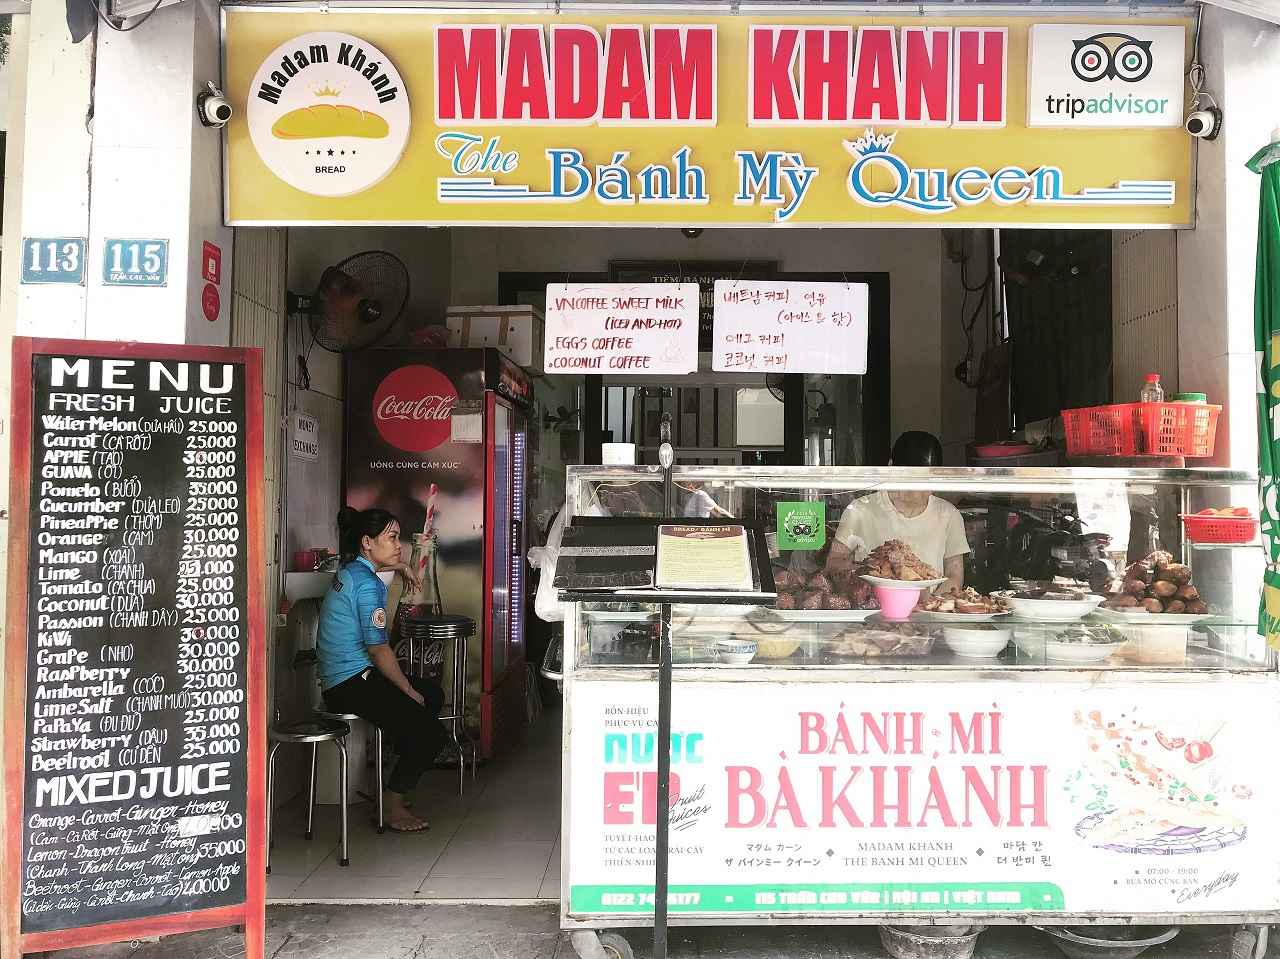 The Banh Mi Queen Madam Khanh's banh mi shop is simple with only a small stall but is loved by many tourists.